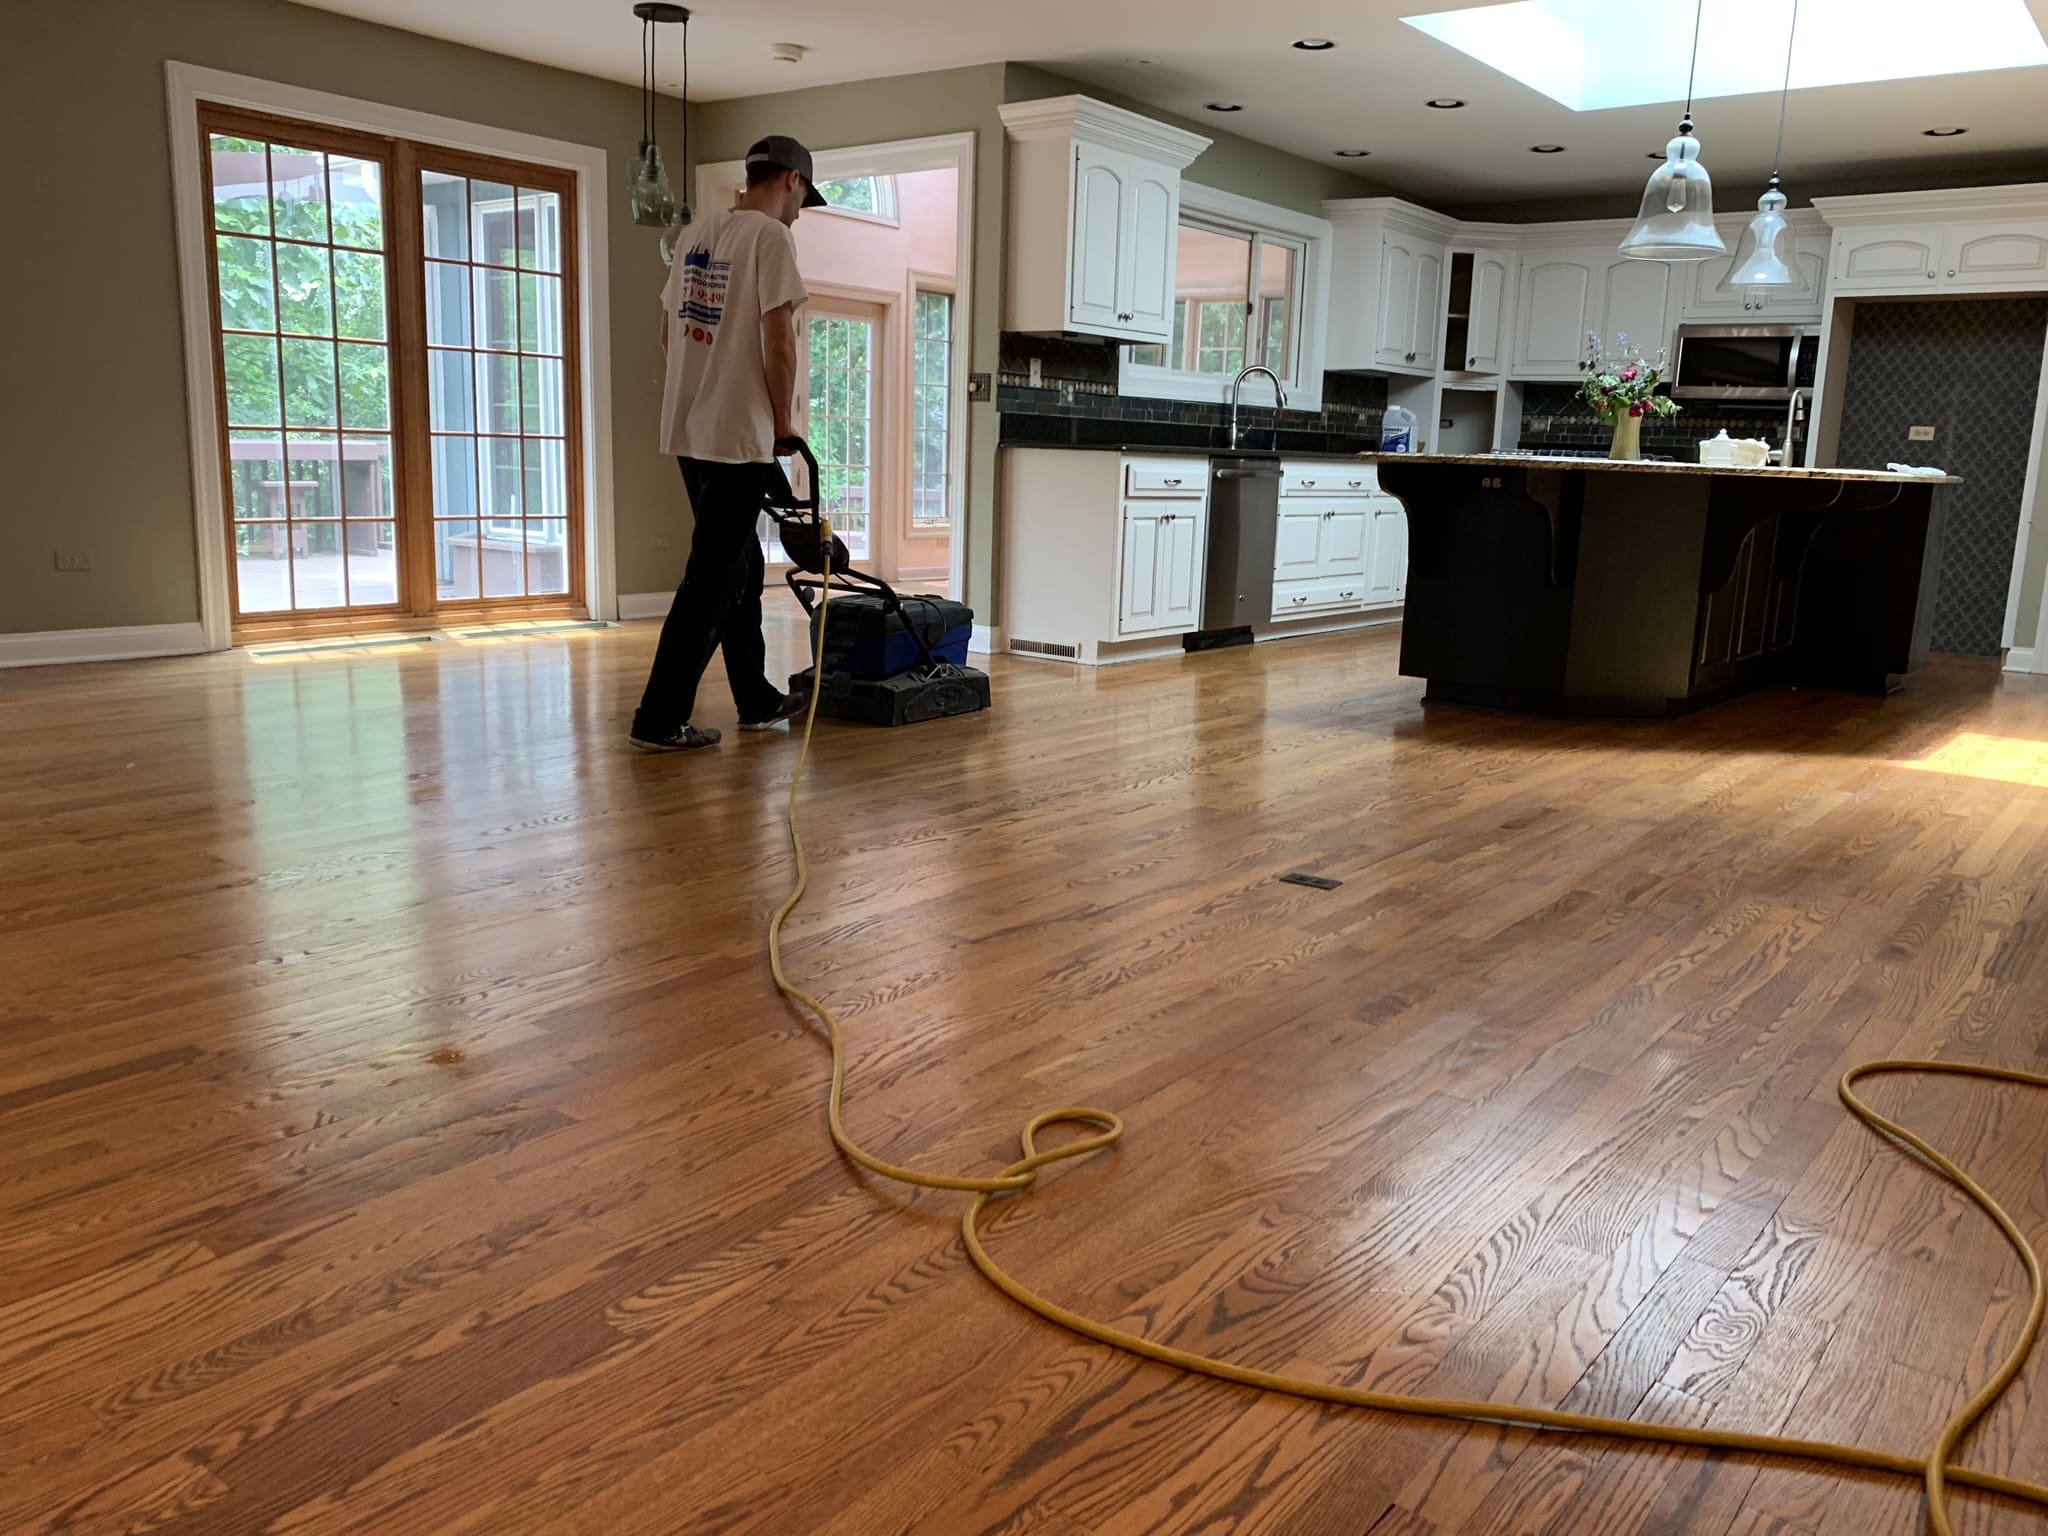 Cleaning And Maintaining Your Hardwood Floors Floor Refinishing Services In Highland Park Plus Flooring